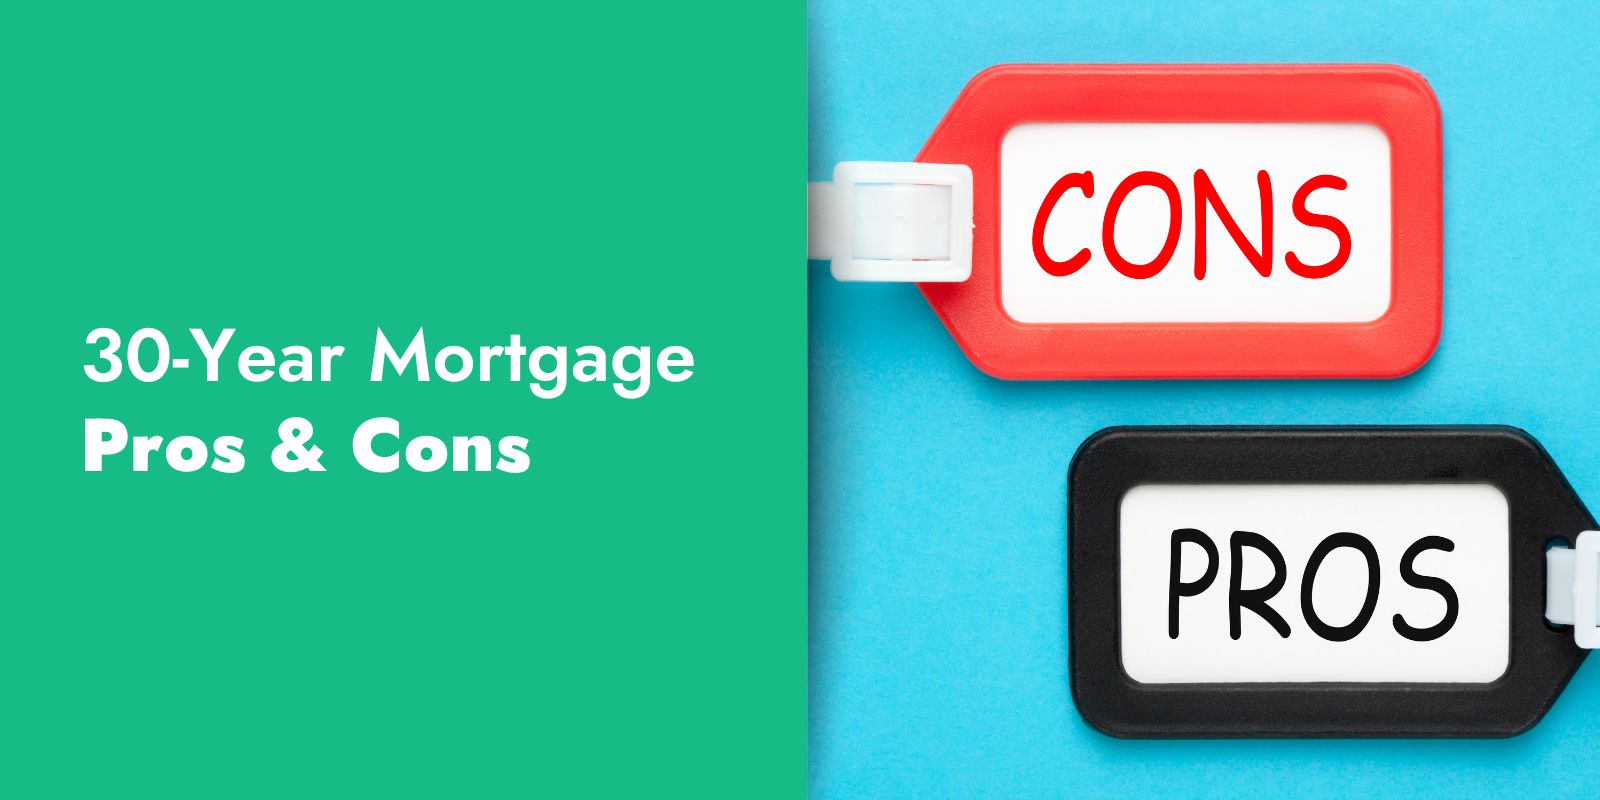 30-Year Mortgage Pros & Cons